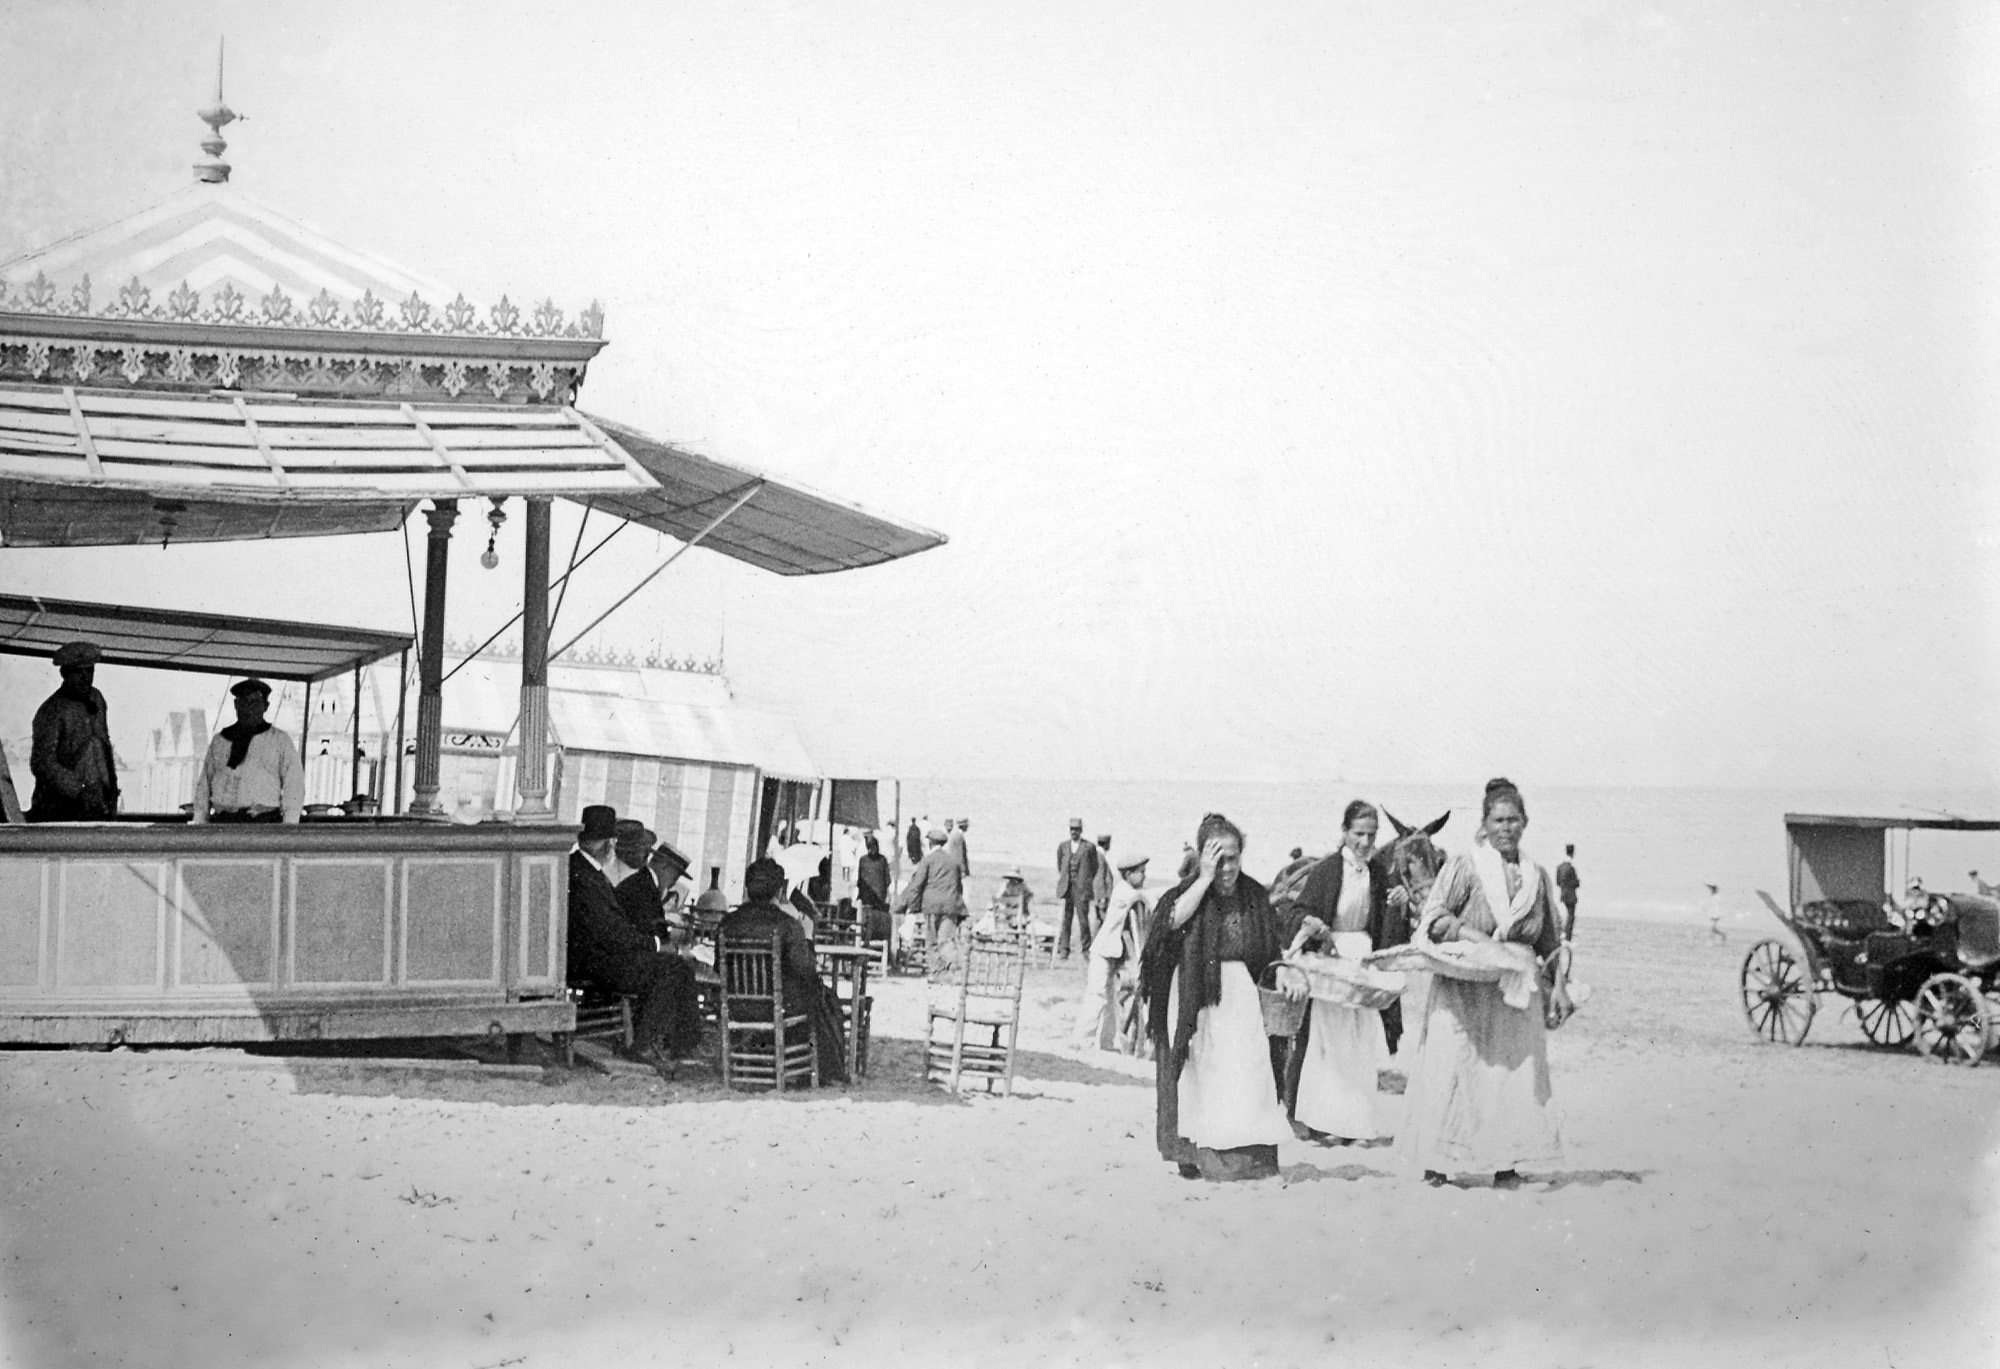 A typical day on the beach under the hot Spanish sun, Sanlucar de Barrameda, Spain, c.1910. Positive in glass taken by my great-grandmother's brother. Any bathing-suits? Anybody sun-bathing? What a difference with any beach on the "civilized" world today. View full size.